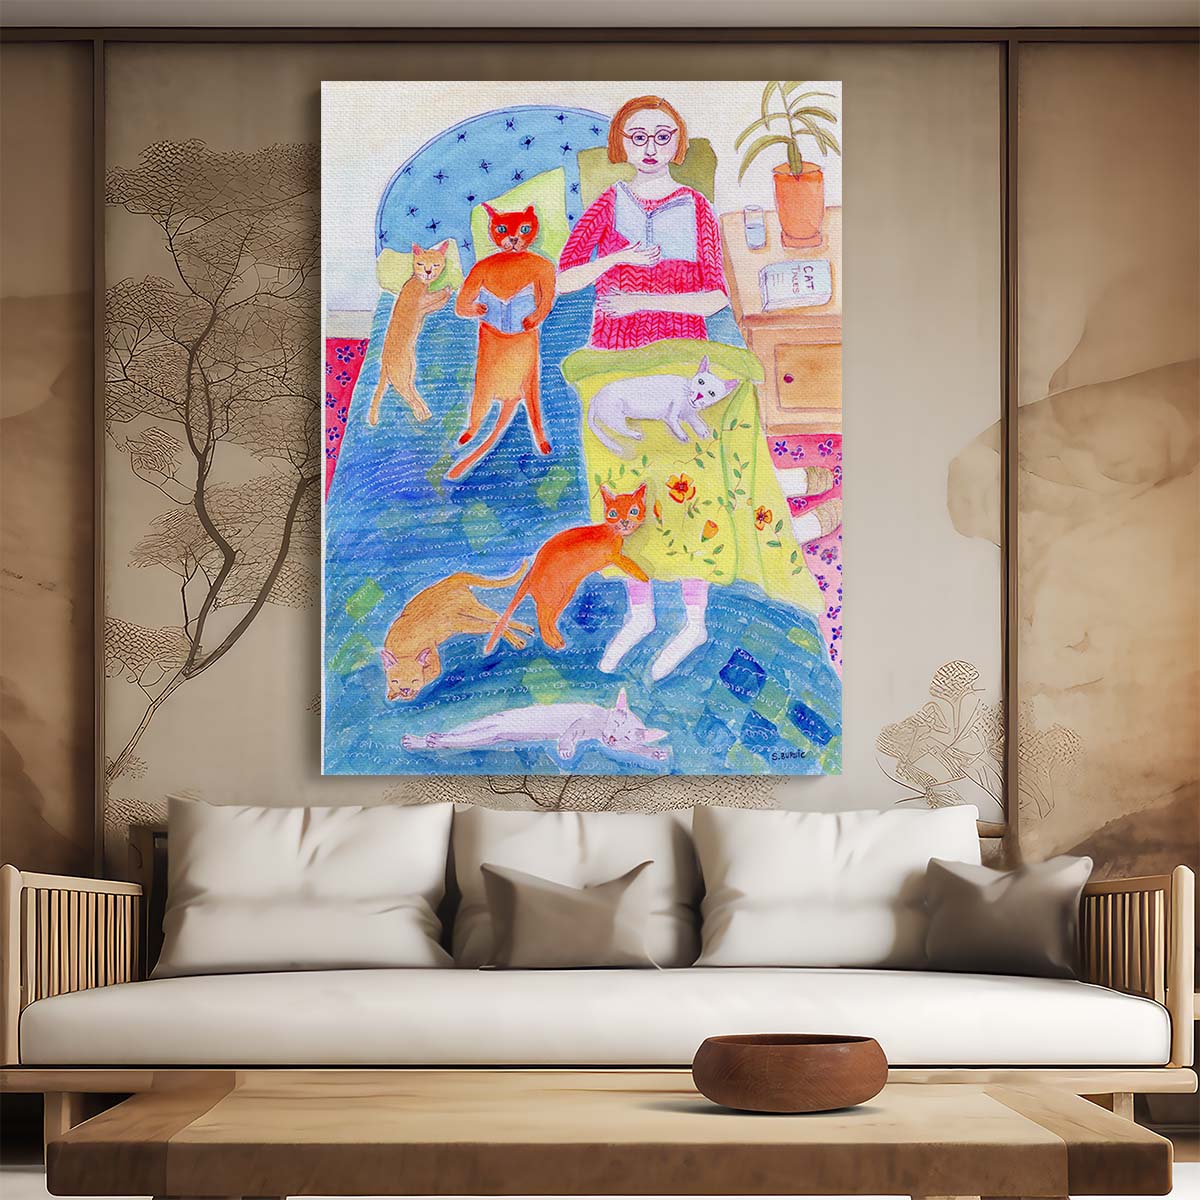 Colorful Humorous Illustration of Woman, Cat and Bedtime Ritual by Luxuriance Designs, made in USA